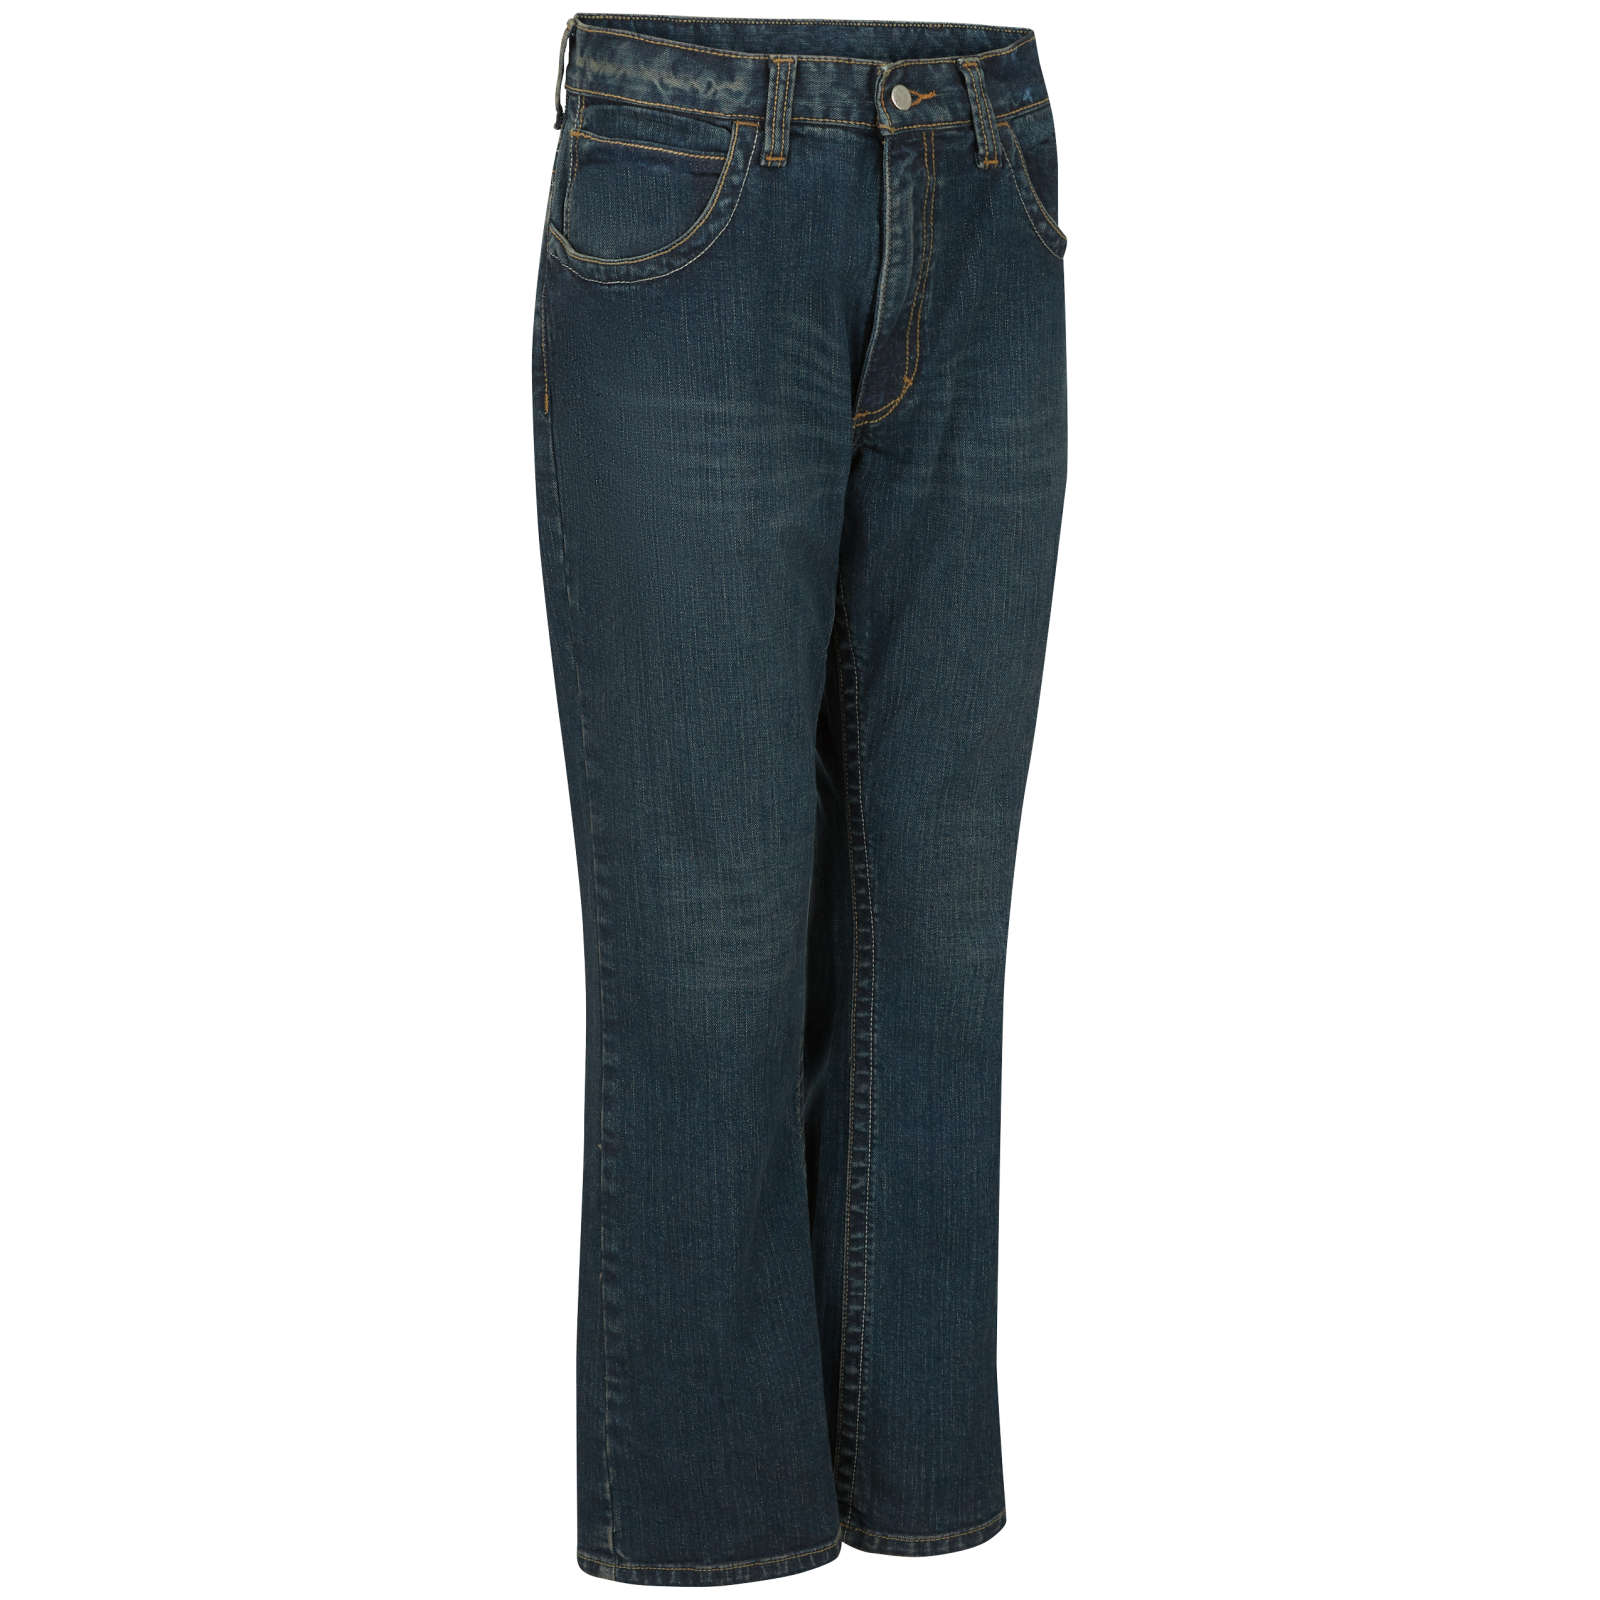 Men's Relaxed Fit Bootcut Jean with 